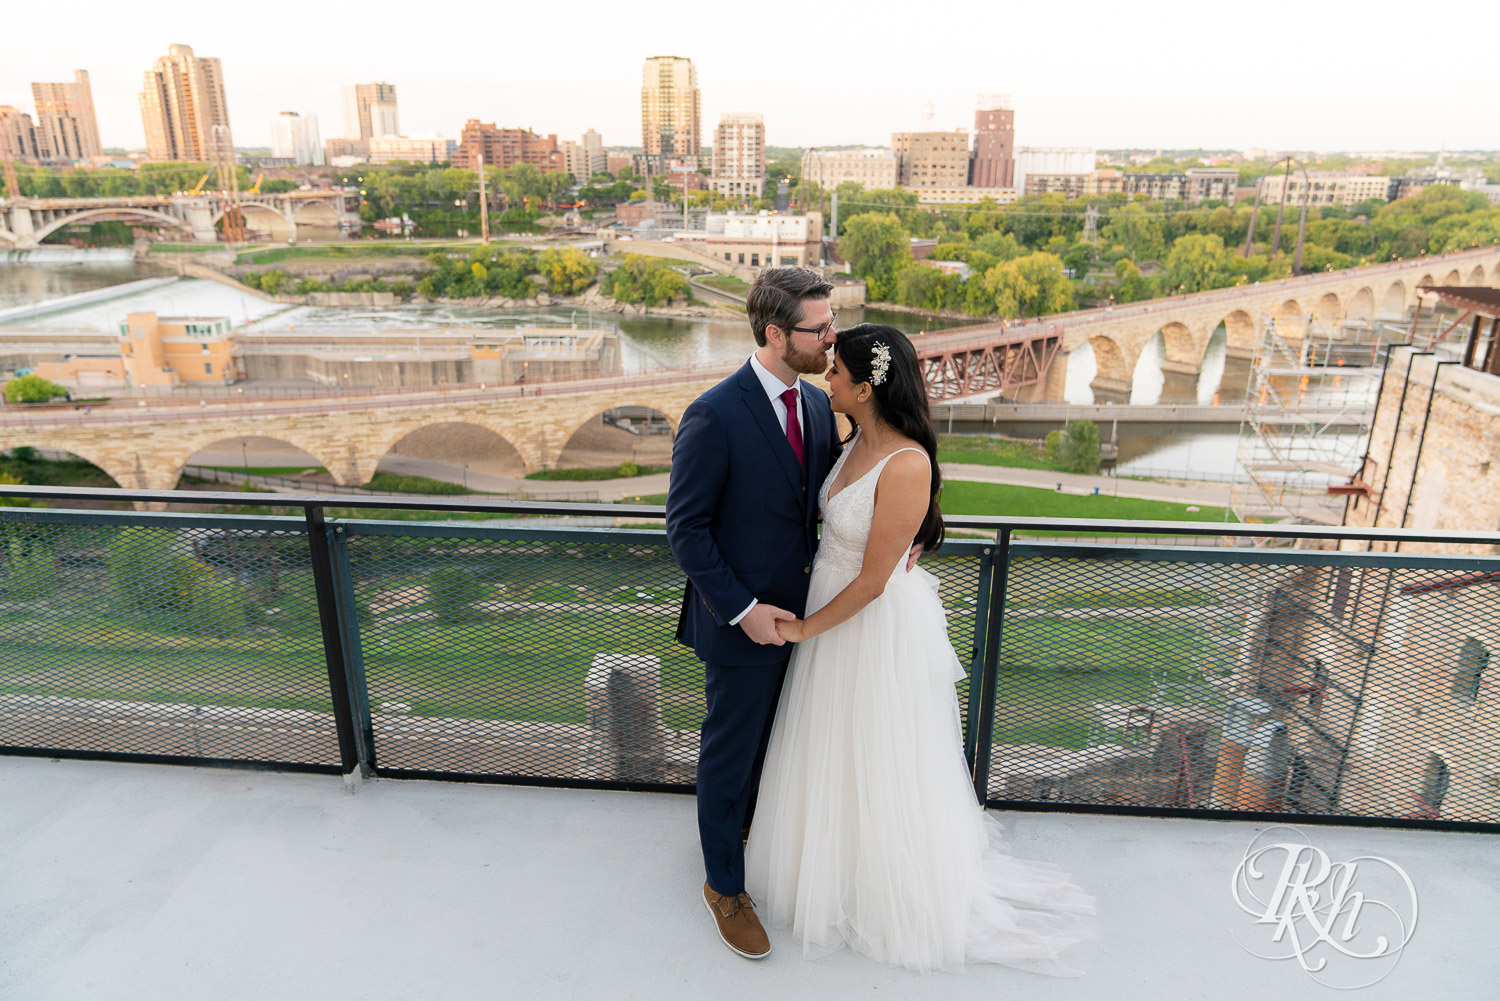 Bride and groom kissing on the roof of Mill City in Minneapolis, Minnesota with the skyline in the background.